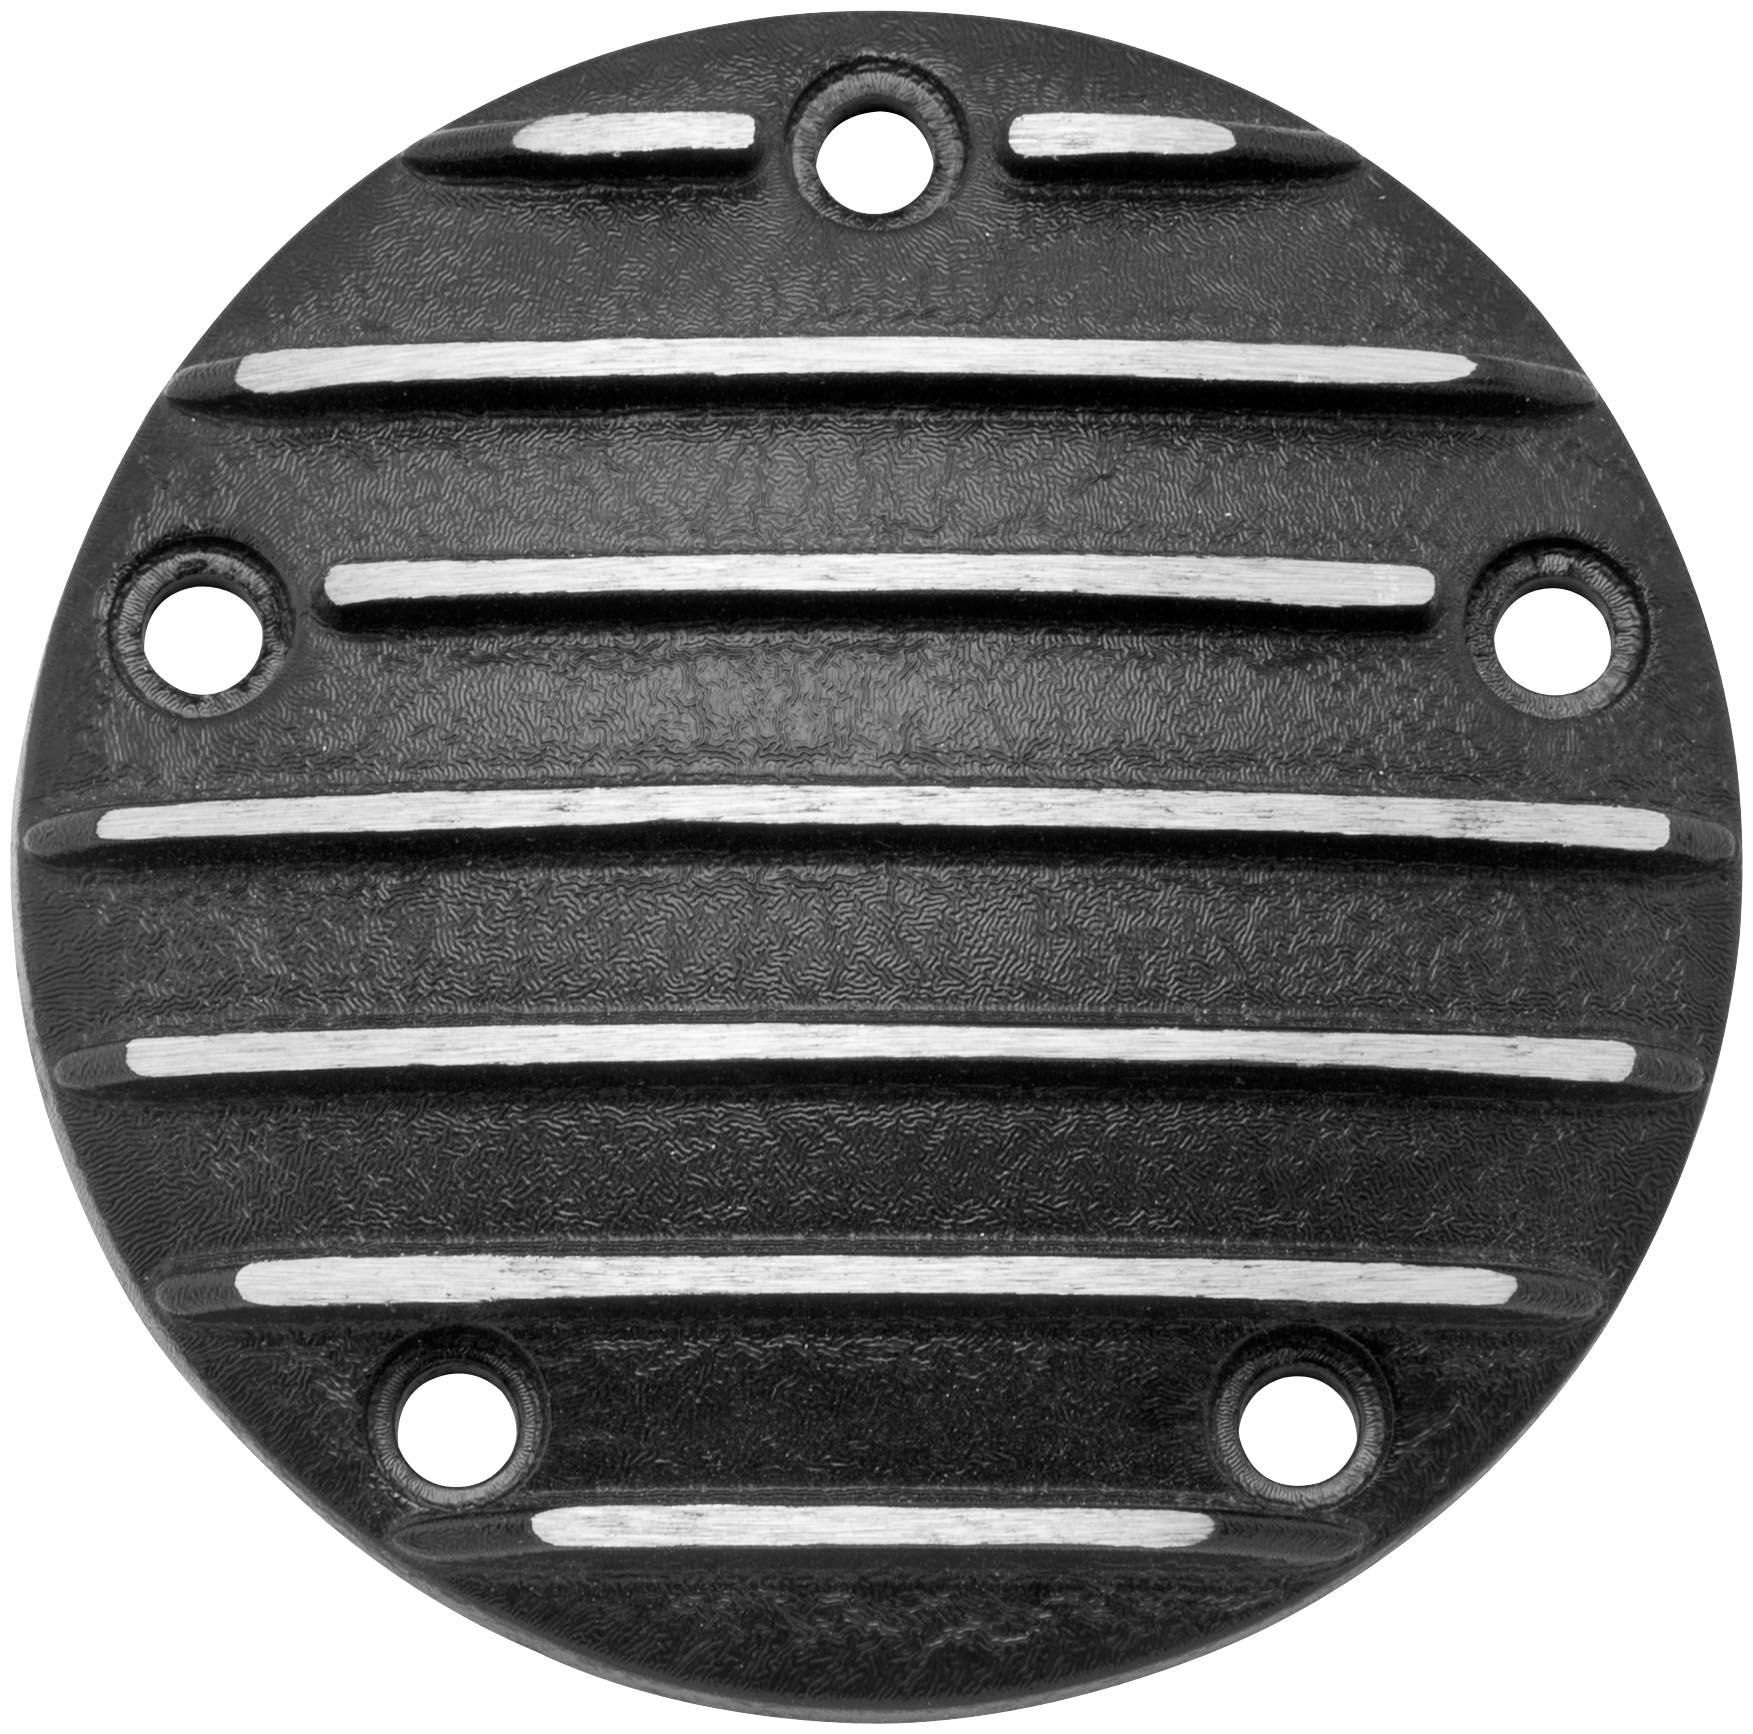 4VY3-BIKER-S-CHO-19-007 Finned Timer Cover